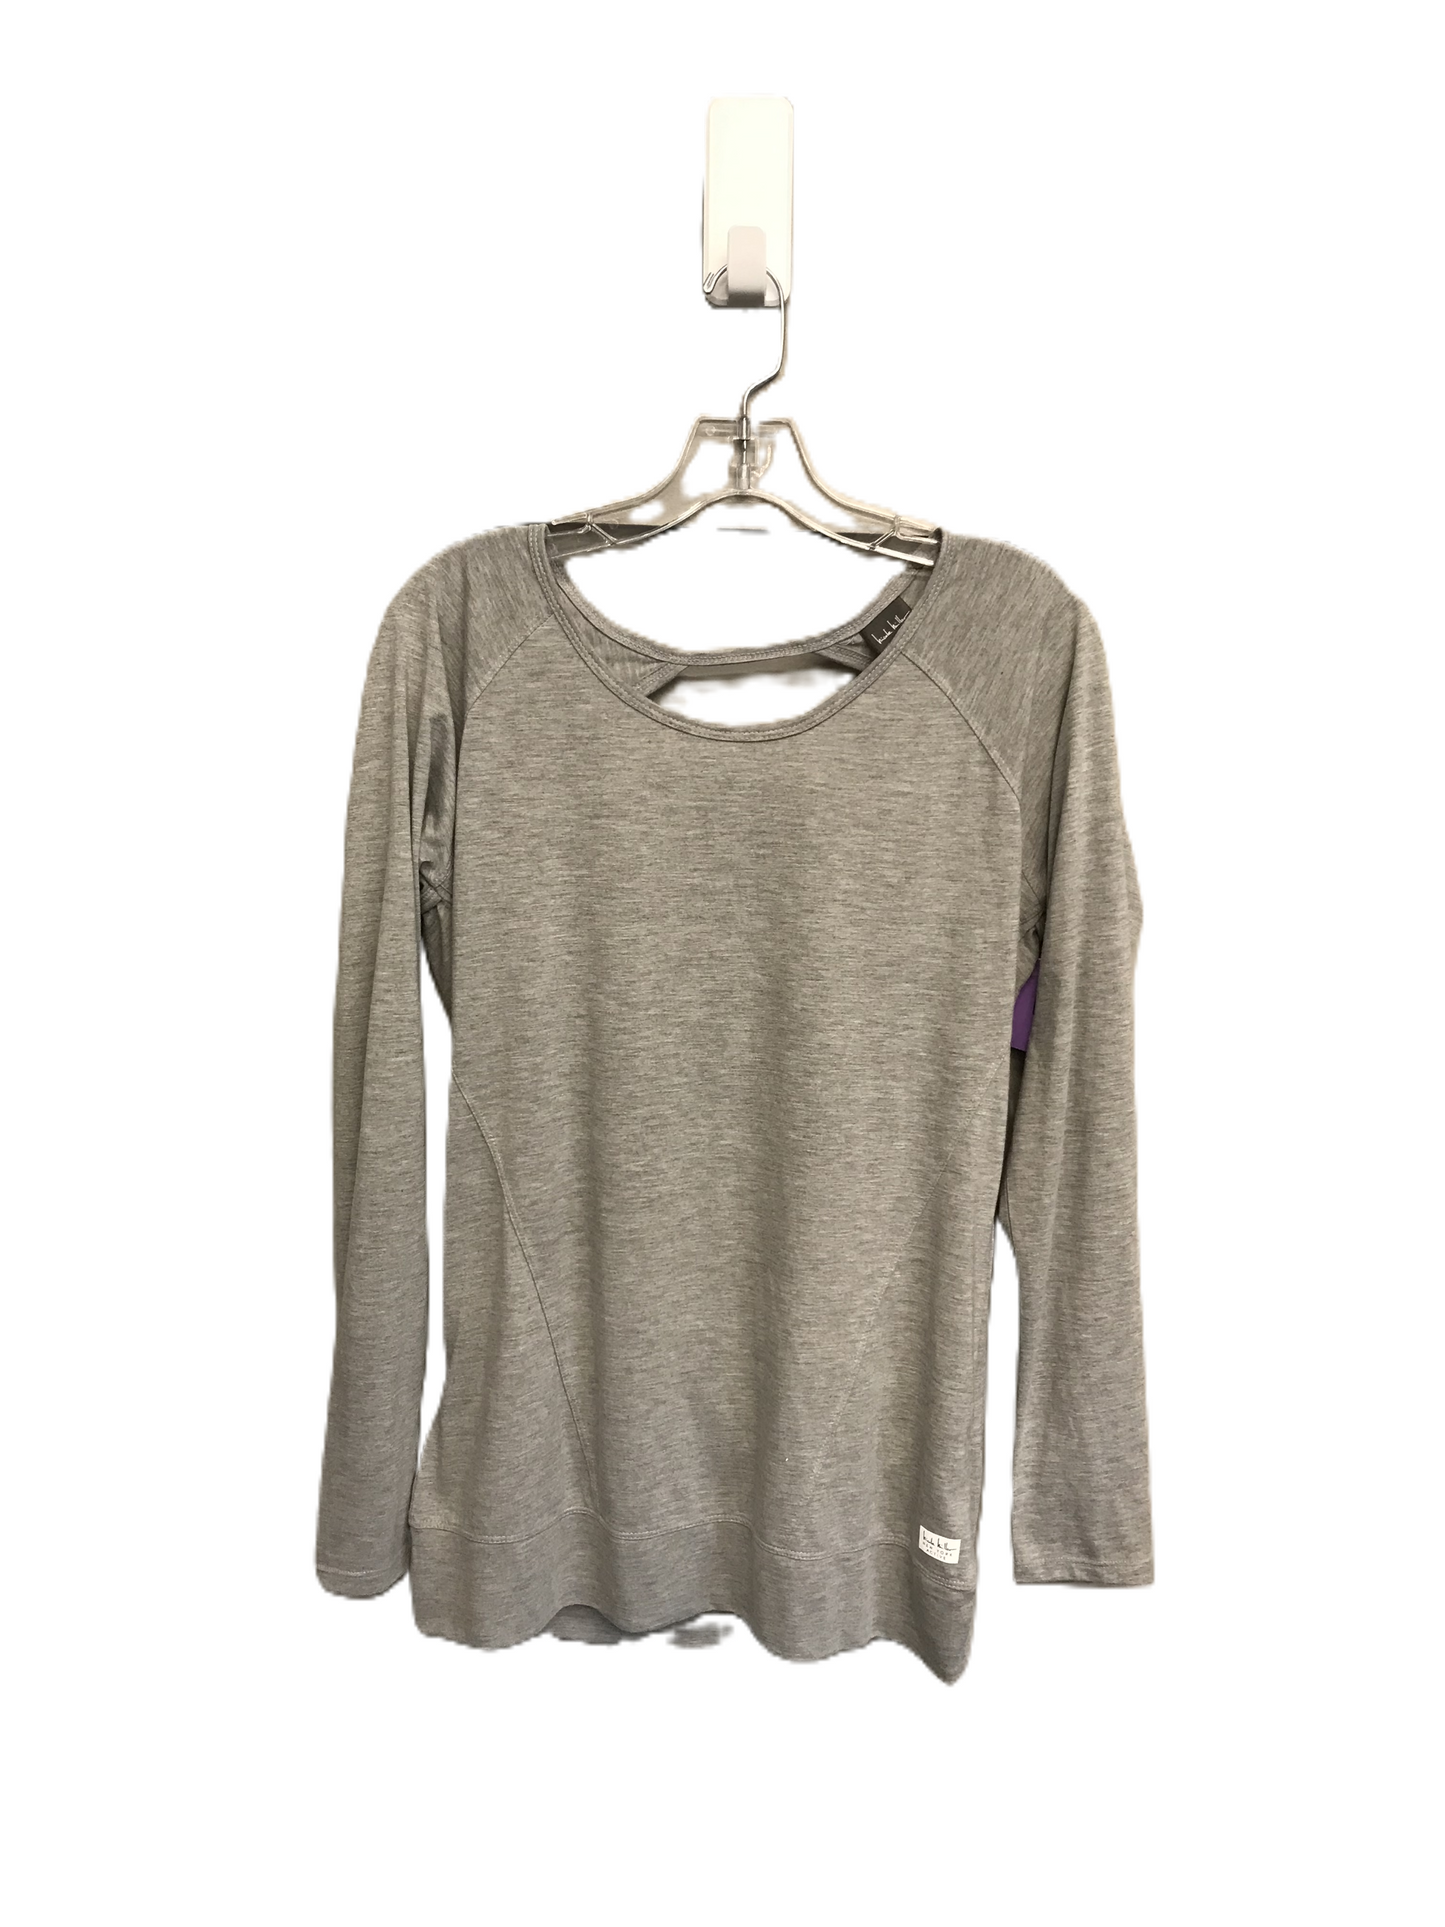 Athletic Top Long Sleeve Crewneck By Nicole Miller  Size: M